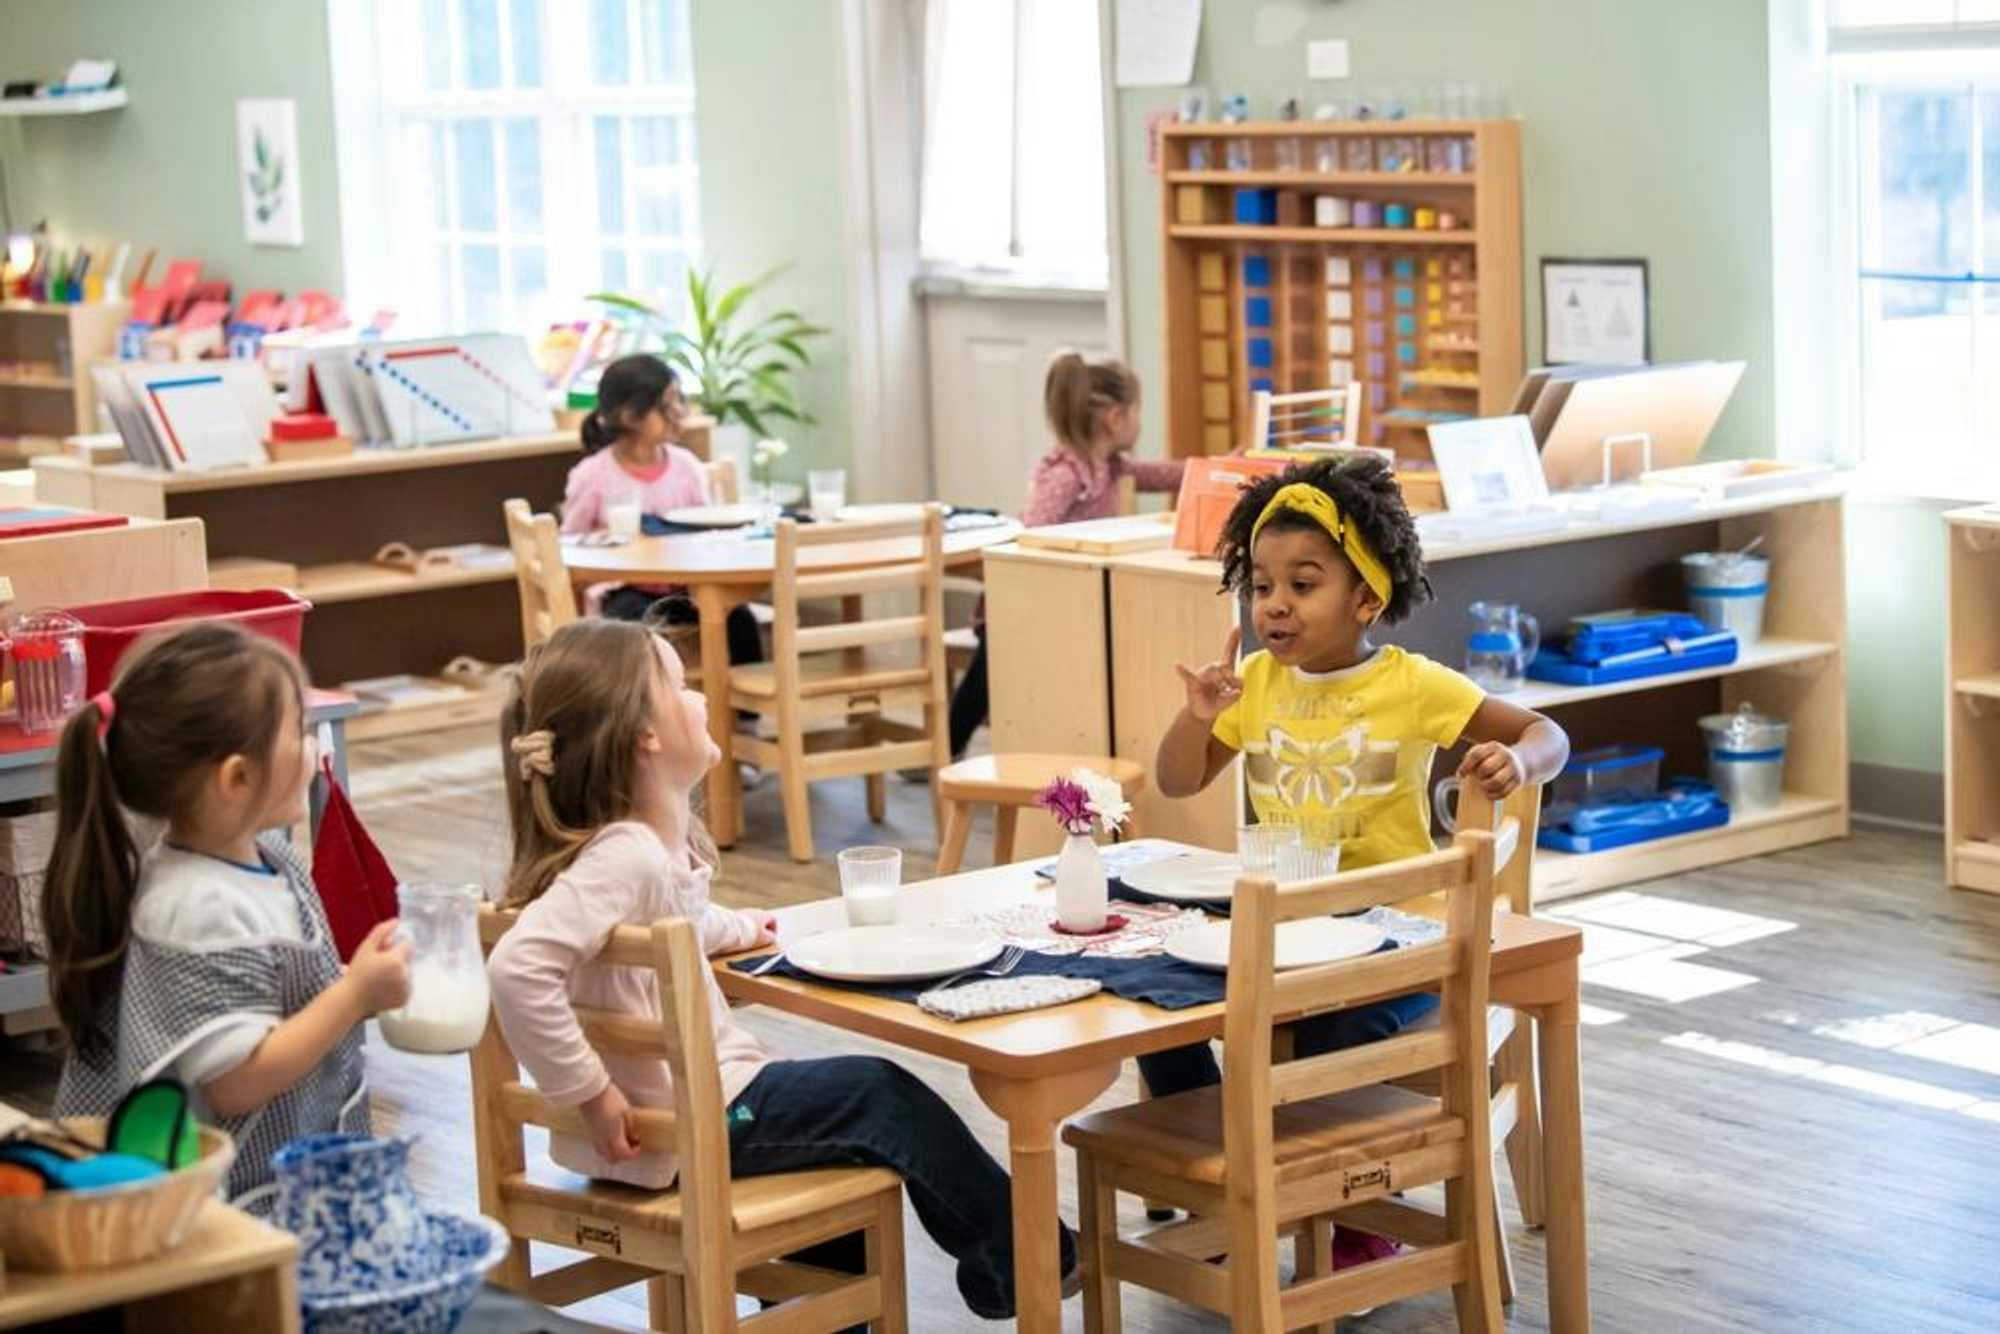 Children in a well-organized mixed-age Montessori classroom ponder over an activity using blocks of different sizes, classic Montessori classroom materials 